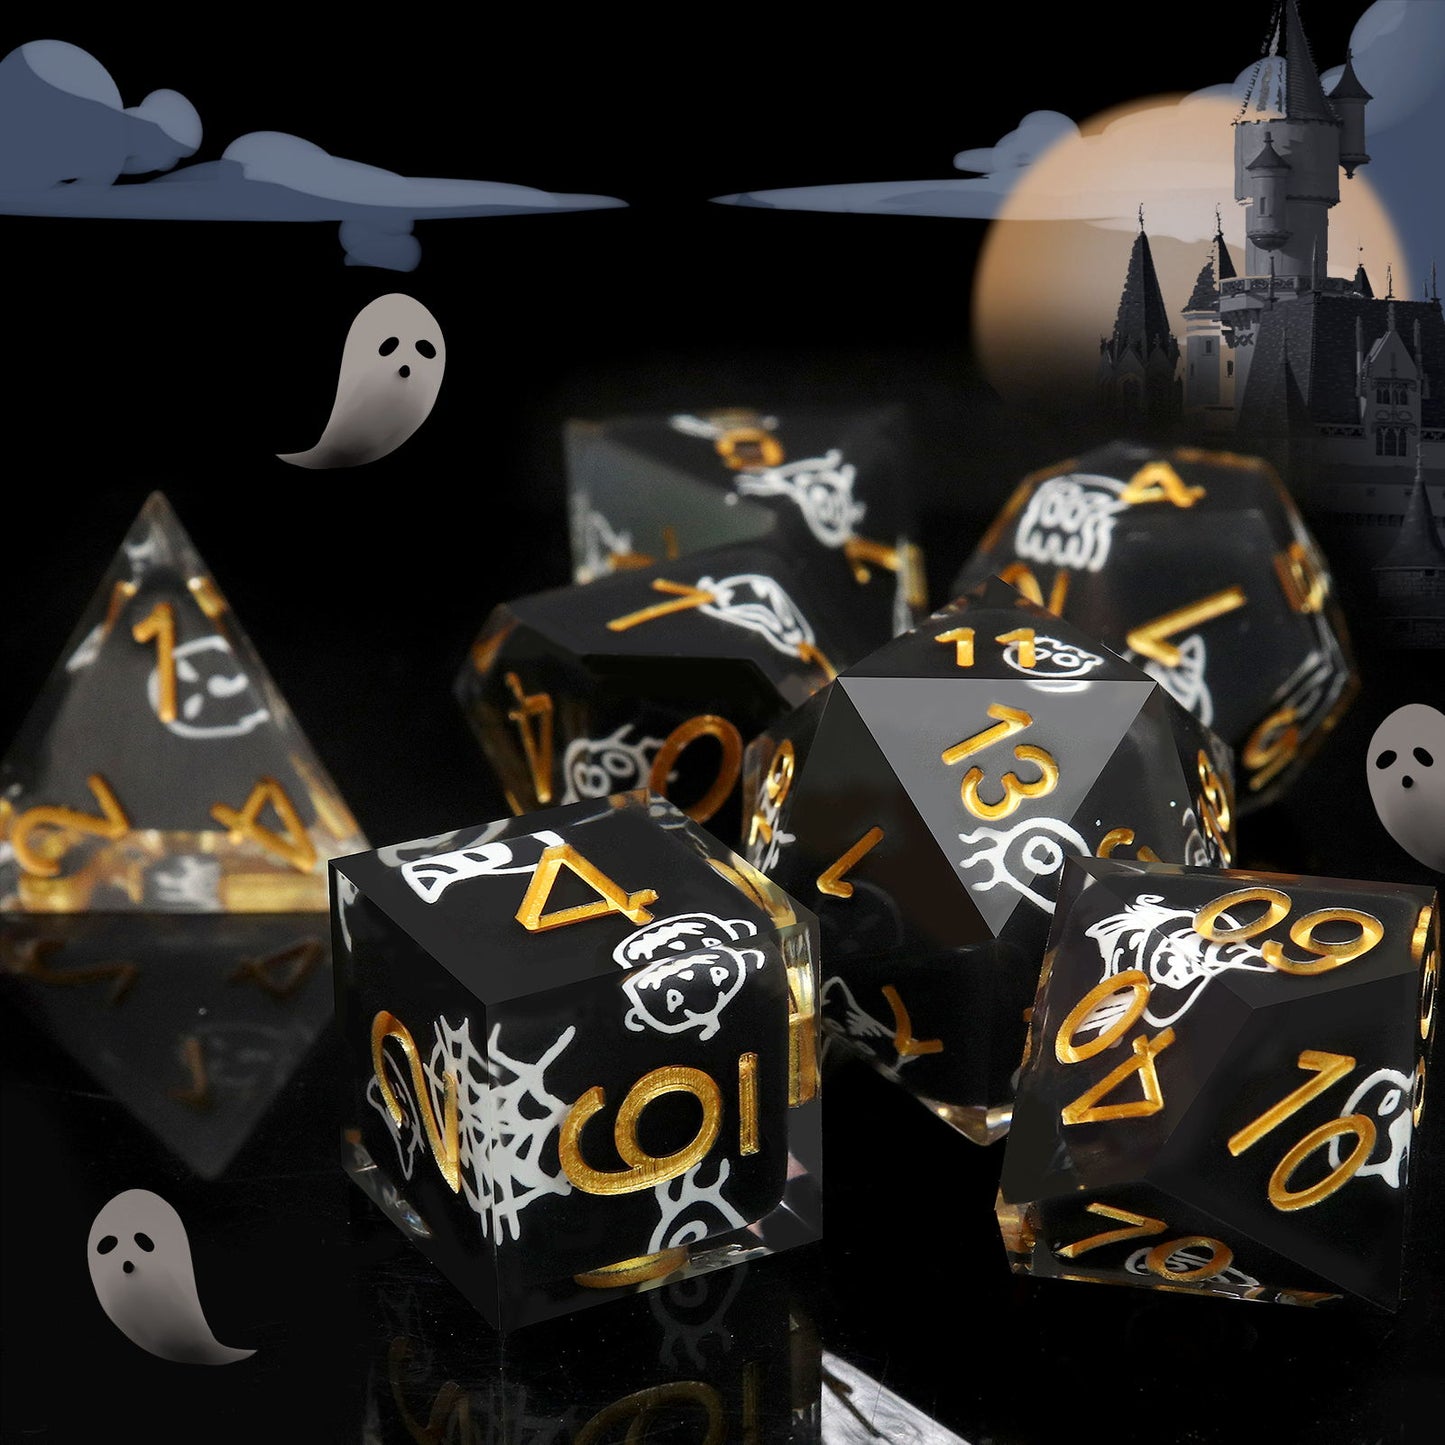 Haxtec Halloween Sharp Edge Dice Set DND Dice Glowing in the Dark D&D Dice for RPG Role Playing Dungeons and Dragons Gift